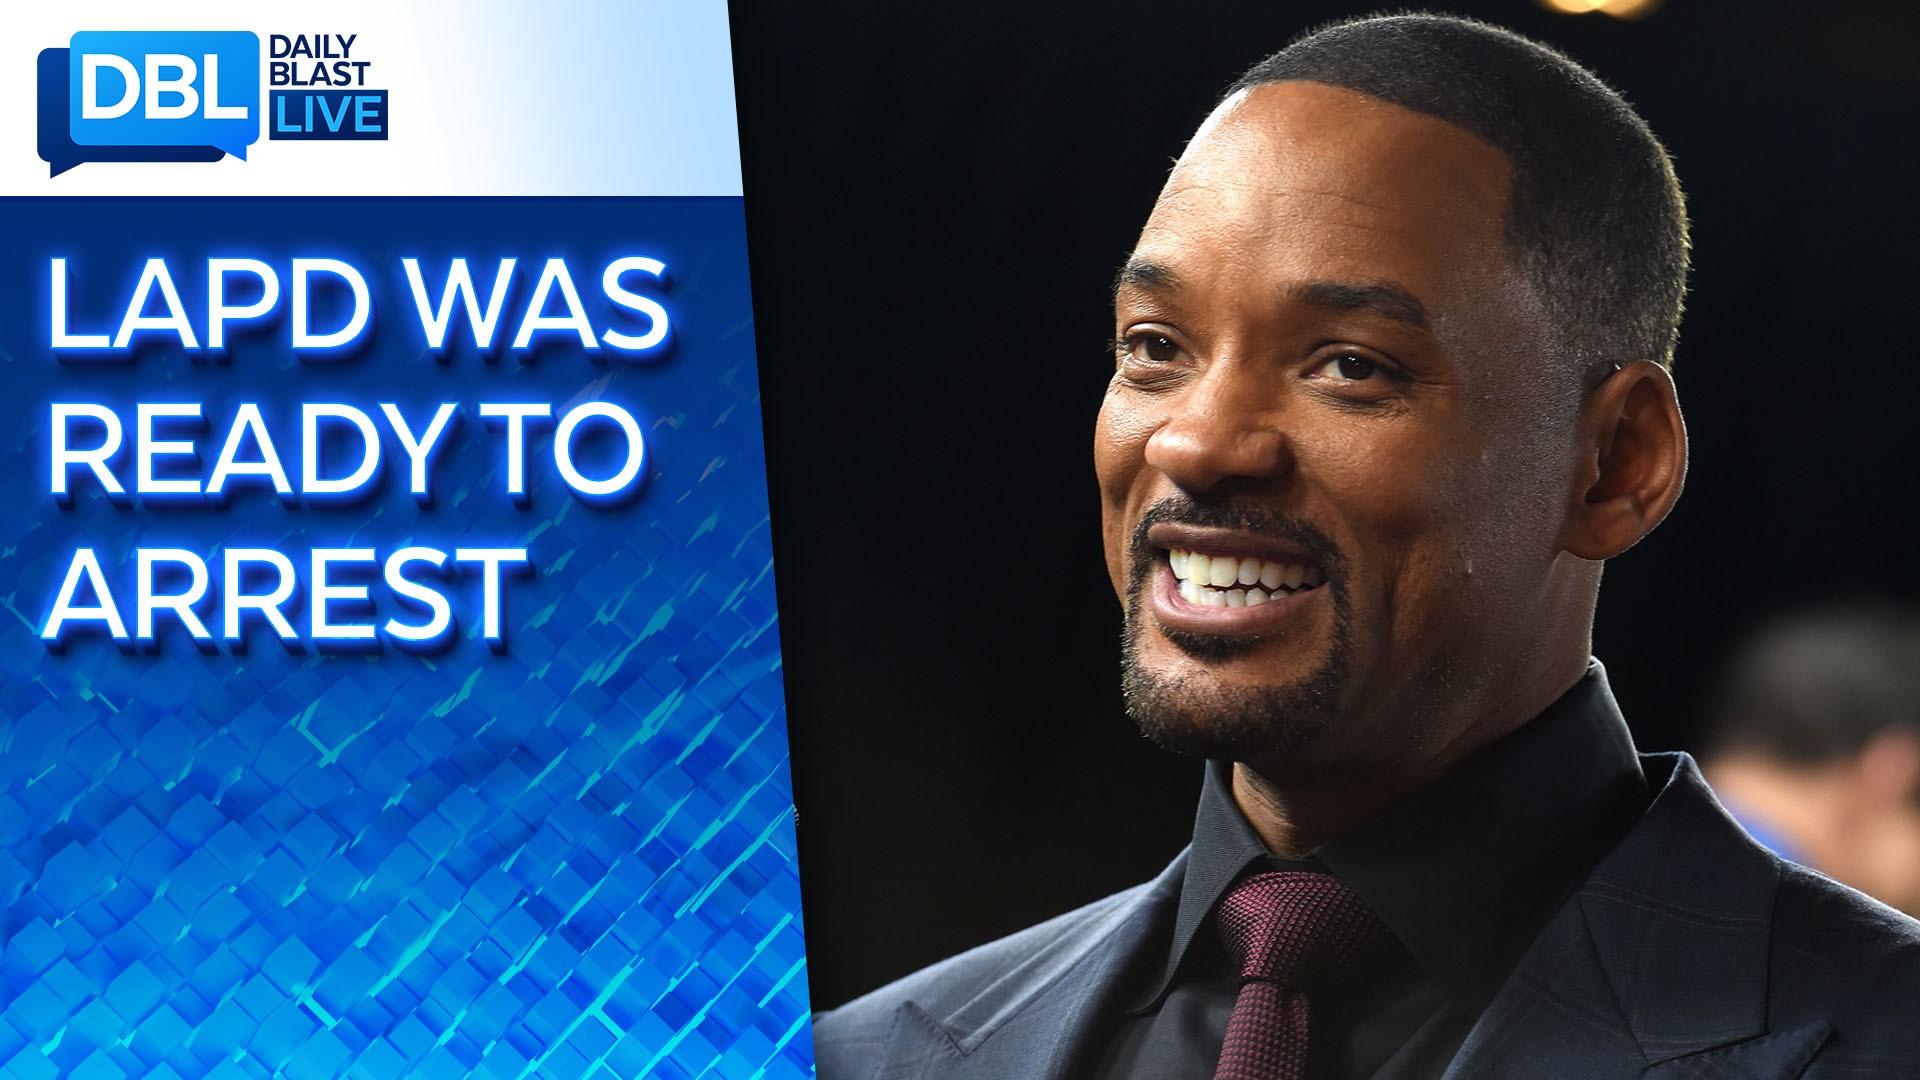 There are conflicting reports about what went down in the immediate aftermath of Will Smith's slap to Chris Rock on the Oscars stage.